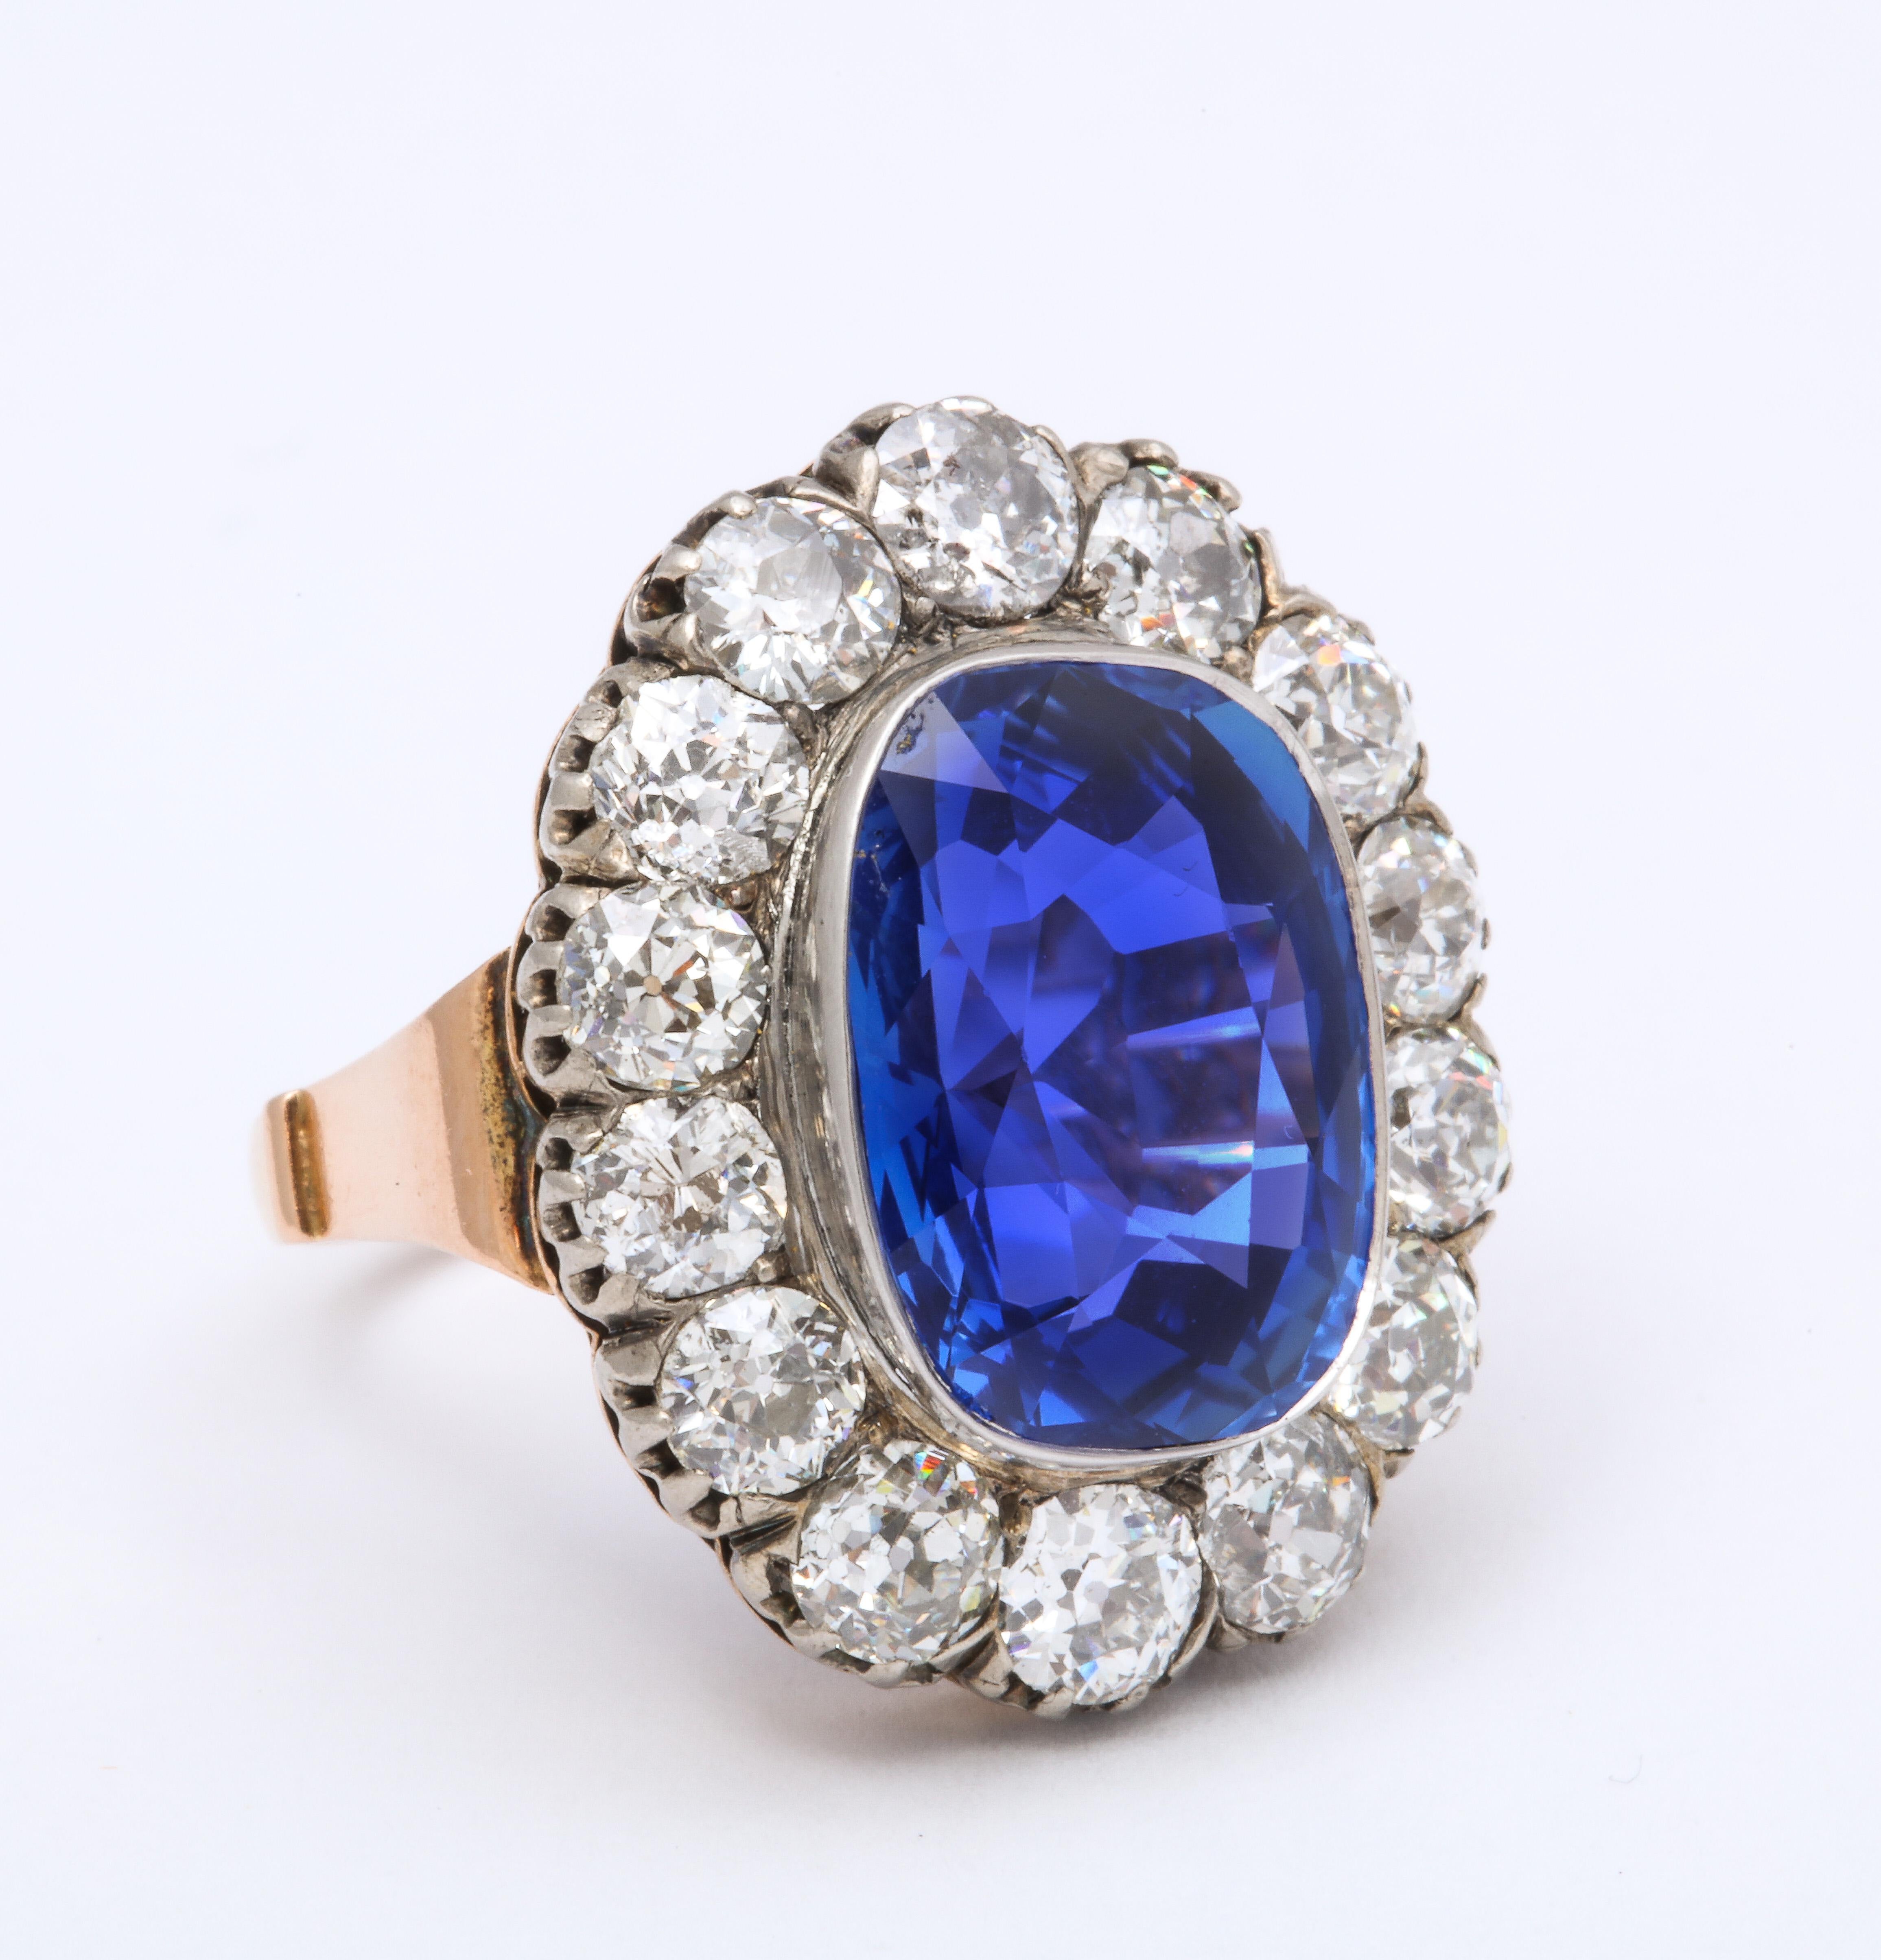 Circa 1880's Ceylon Sapphire and Diamond ring in 15k Yellow Gold, stamped KS. There are 14 old mine cut diamonds totaling 4.50 carats. The center showcases an 11.70 carat cushion cut natural Ceylon Sapphire.  Circa 1850. Size 6.  AGL report